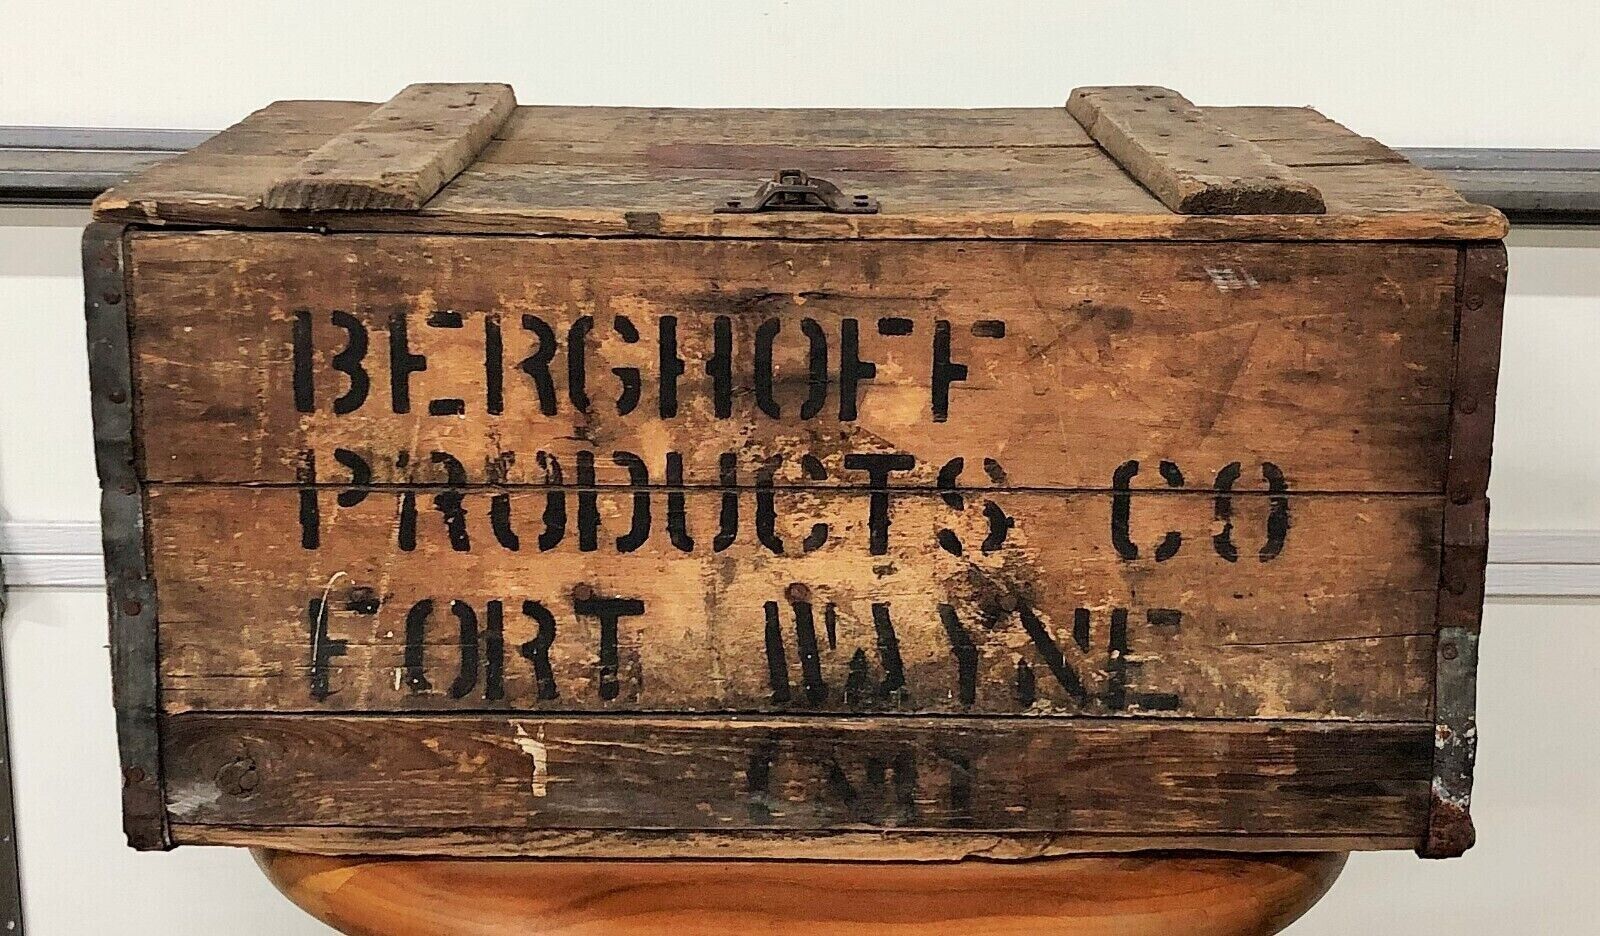 Antique BERGHOFF BEER Fort Wayne Indiana Hinged Divided Wood Crate Box